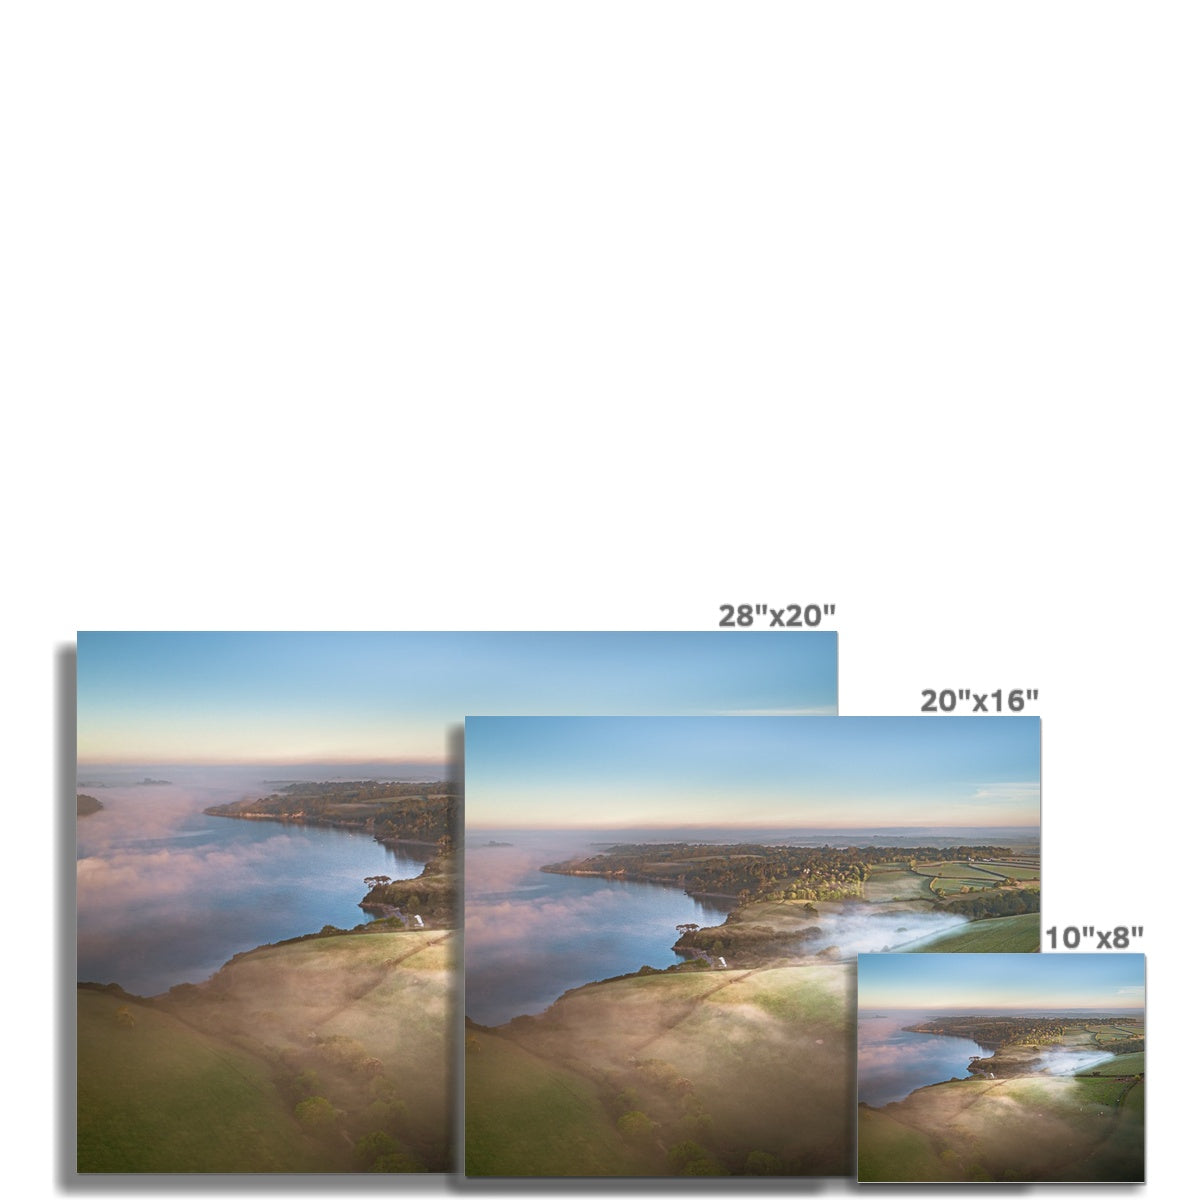 helford mist picture sizes